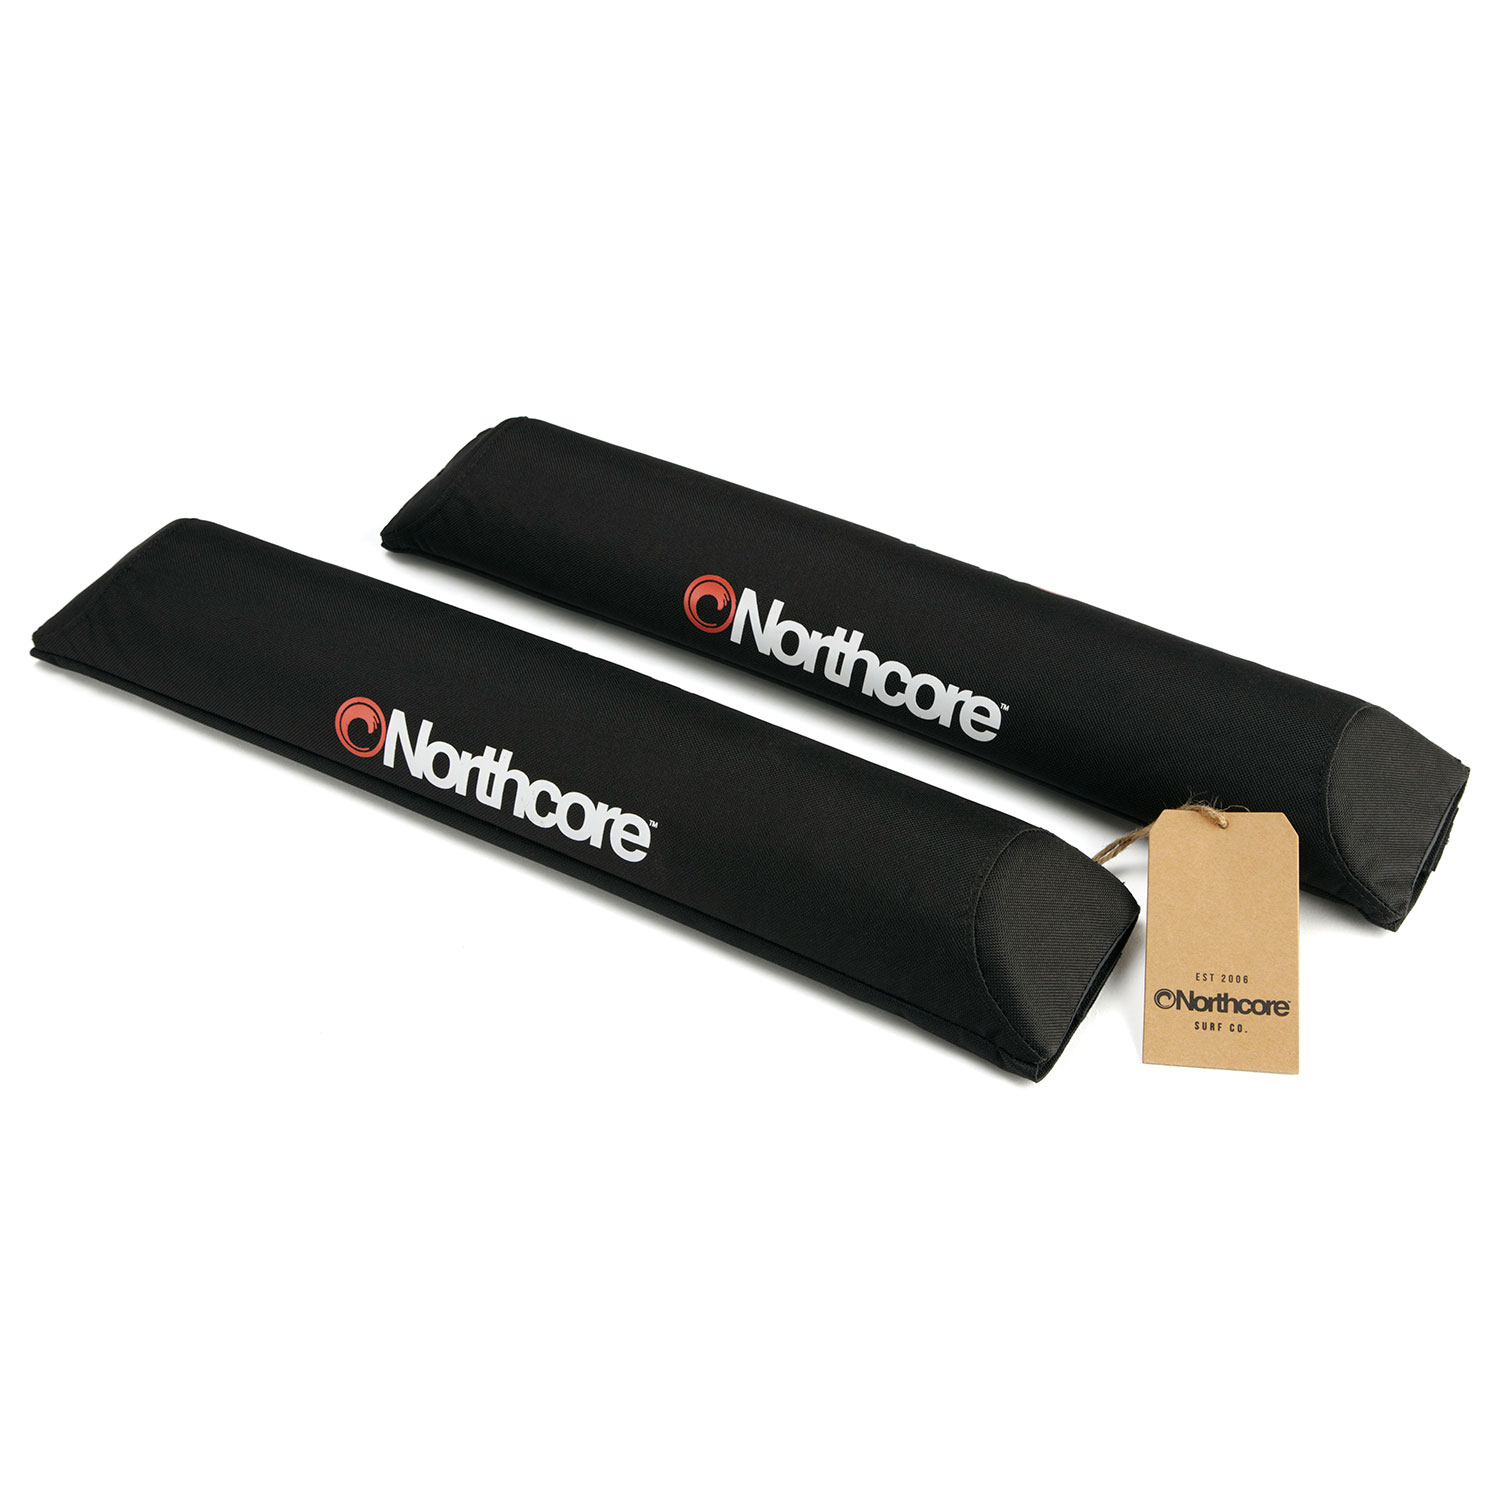 Northcore Rack Pads for Aero Bars Coast Water Sports